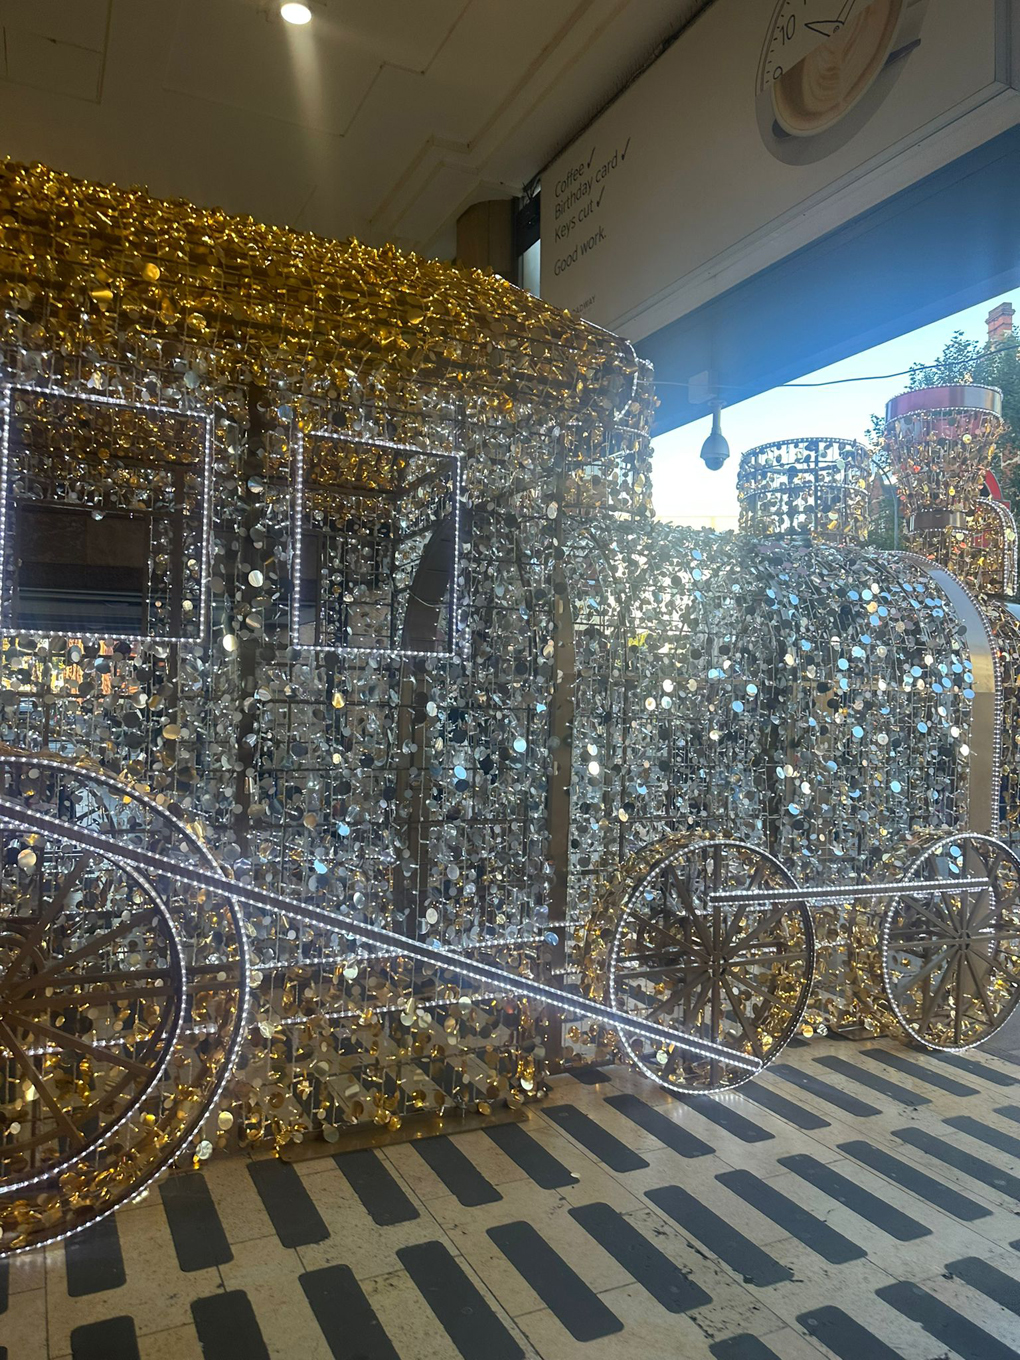 Shiny train made of something that looks like coins